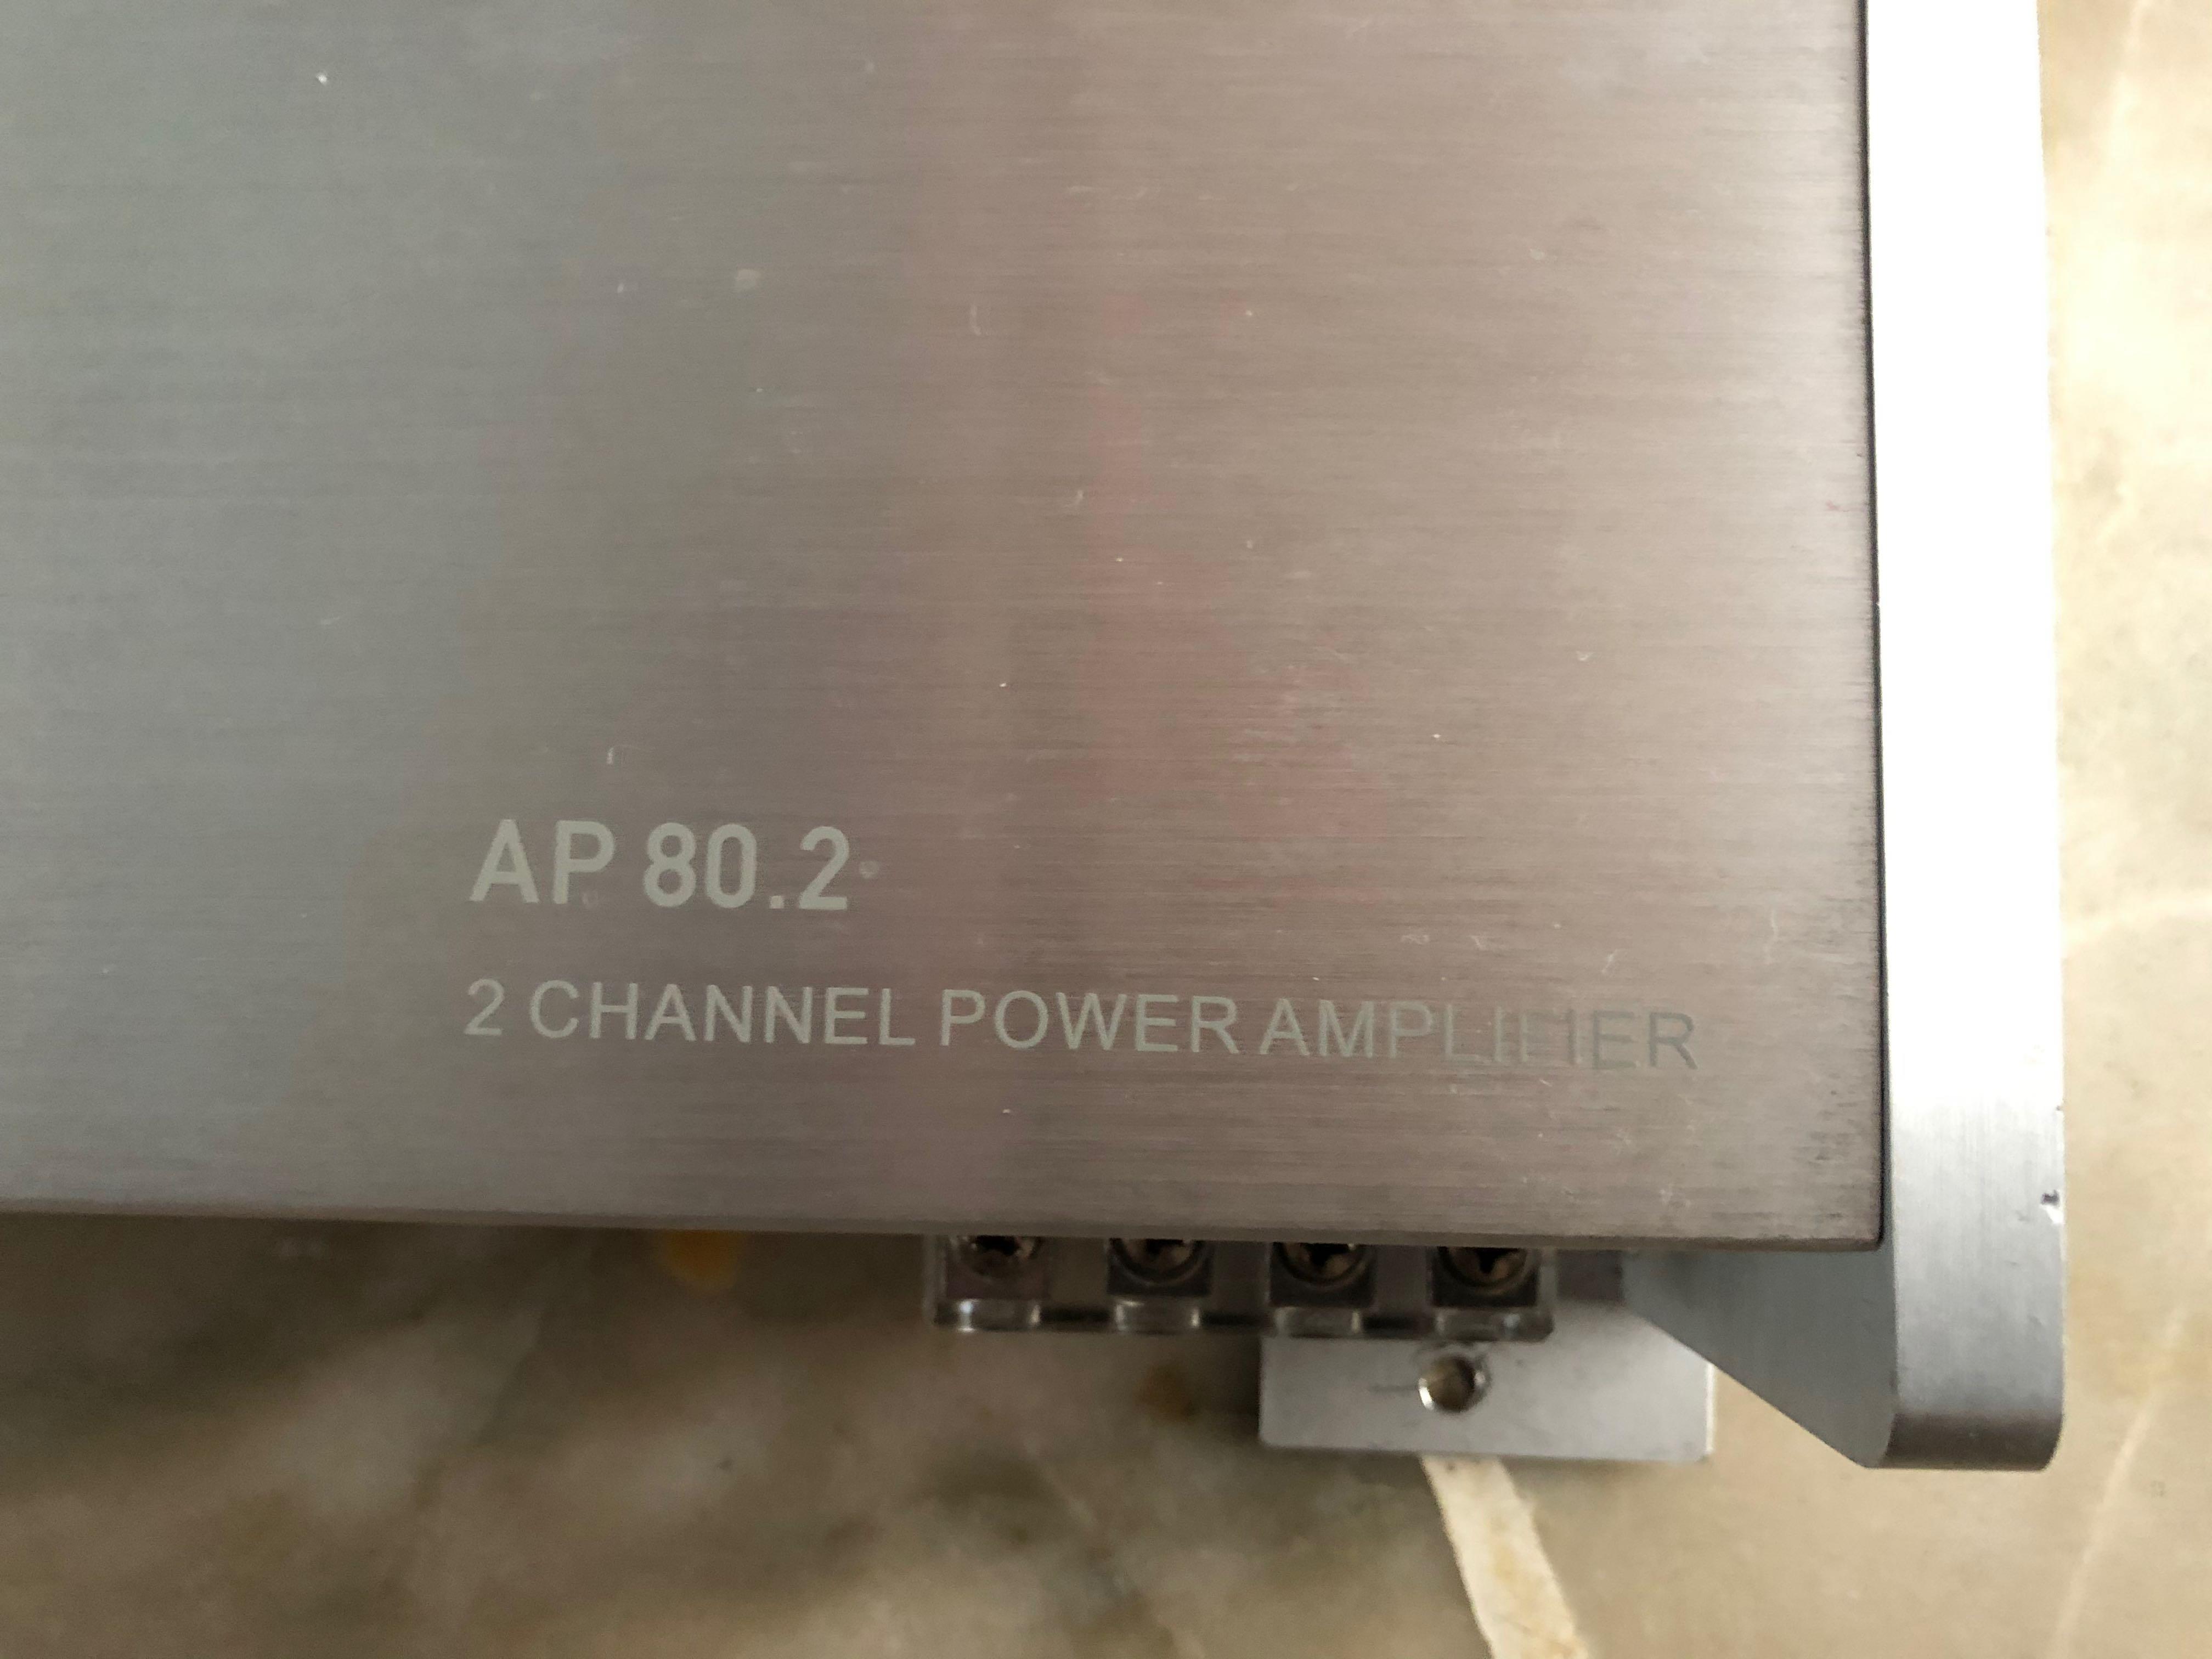 Phass AP80.2 2 Channel Power Amplifier Amp, Auto Accessories on ...